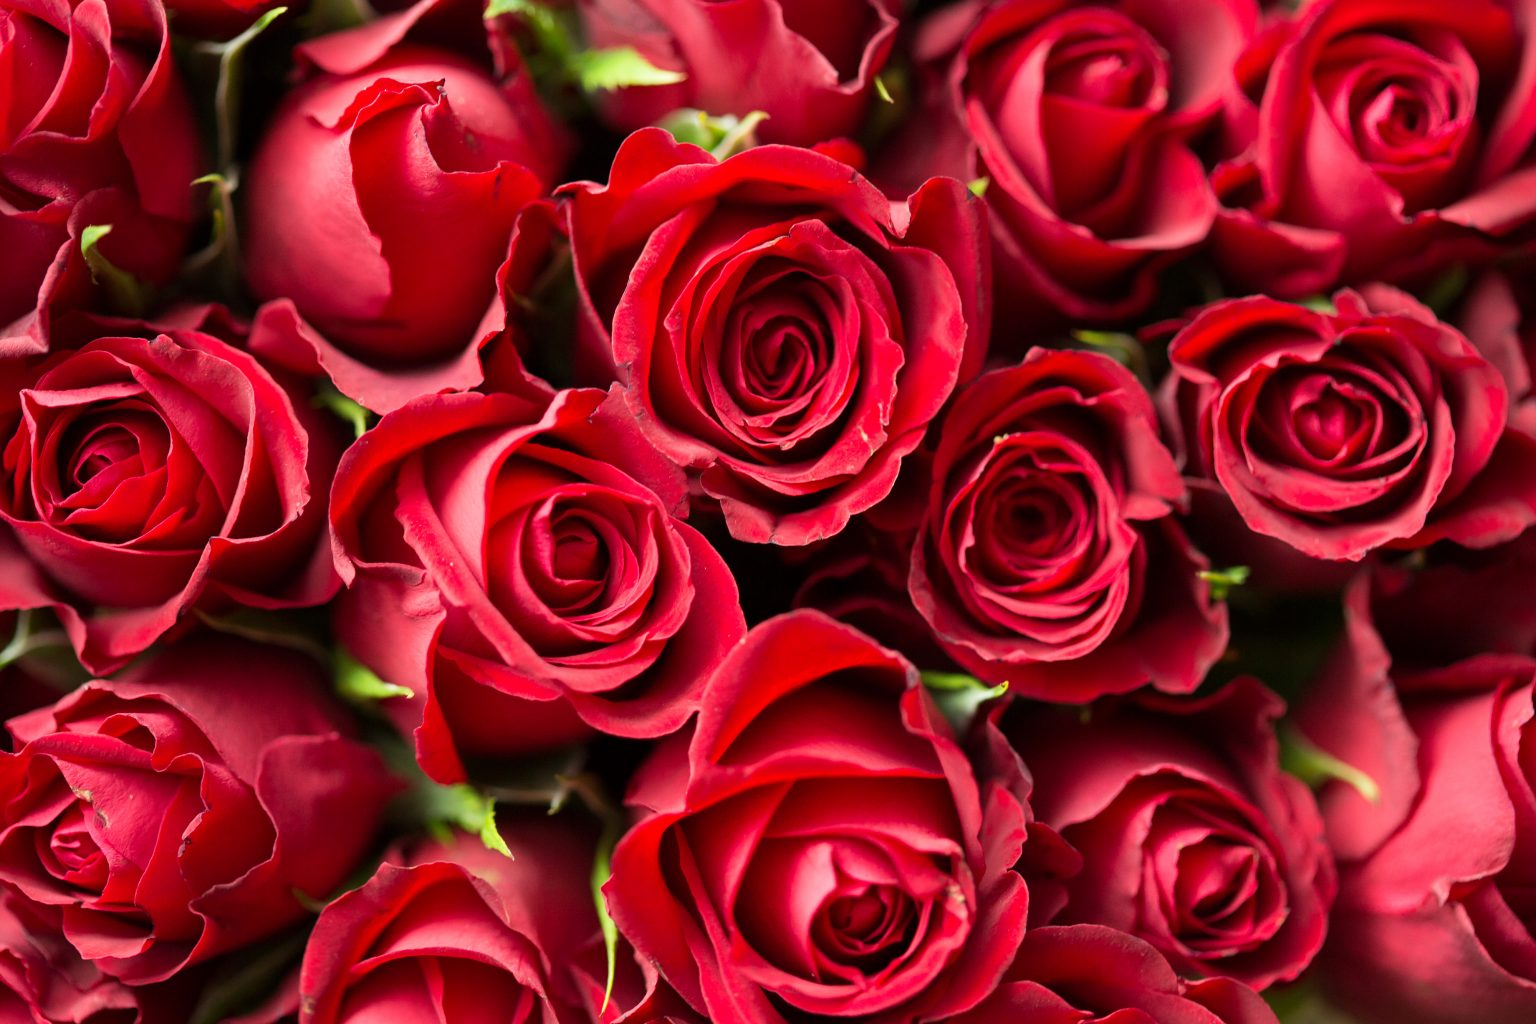 Nepal bans import of roses for Valentine’s Day